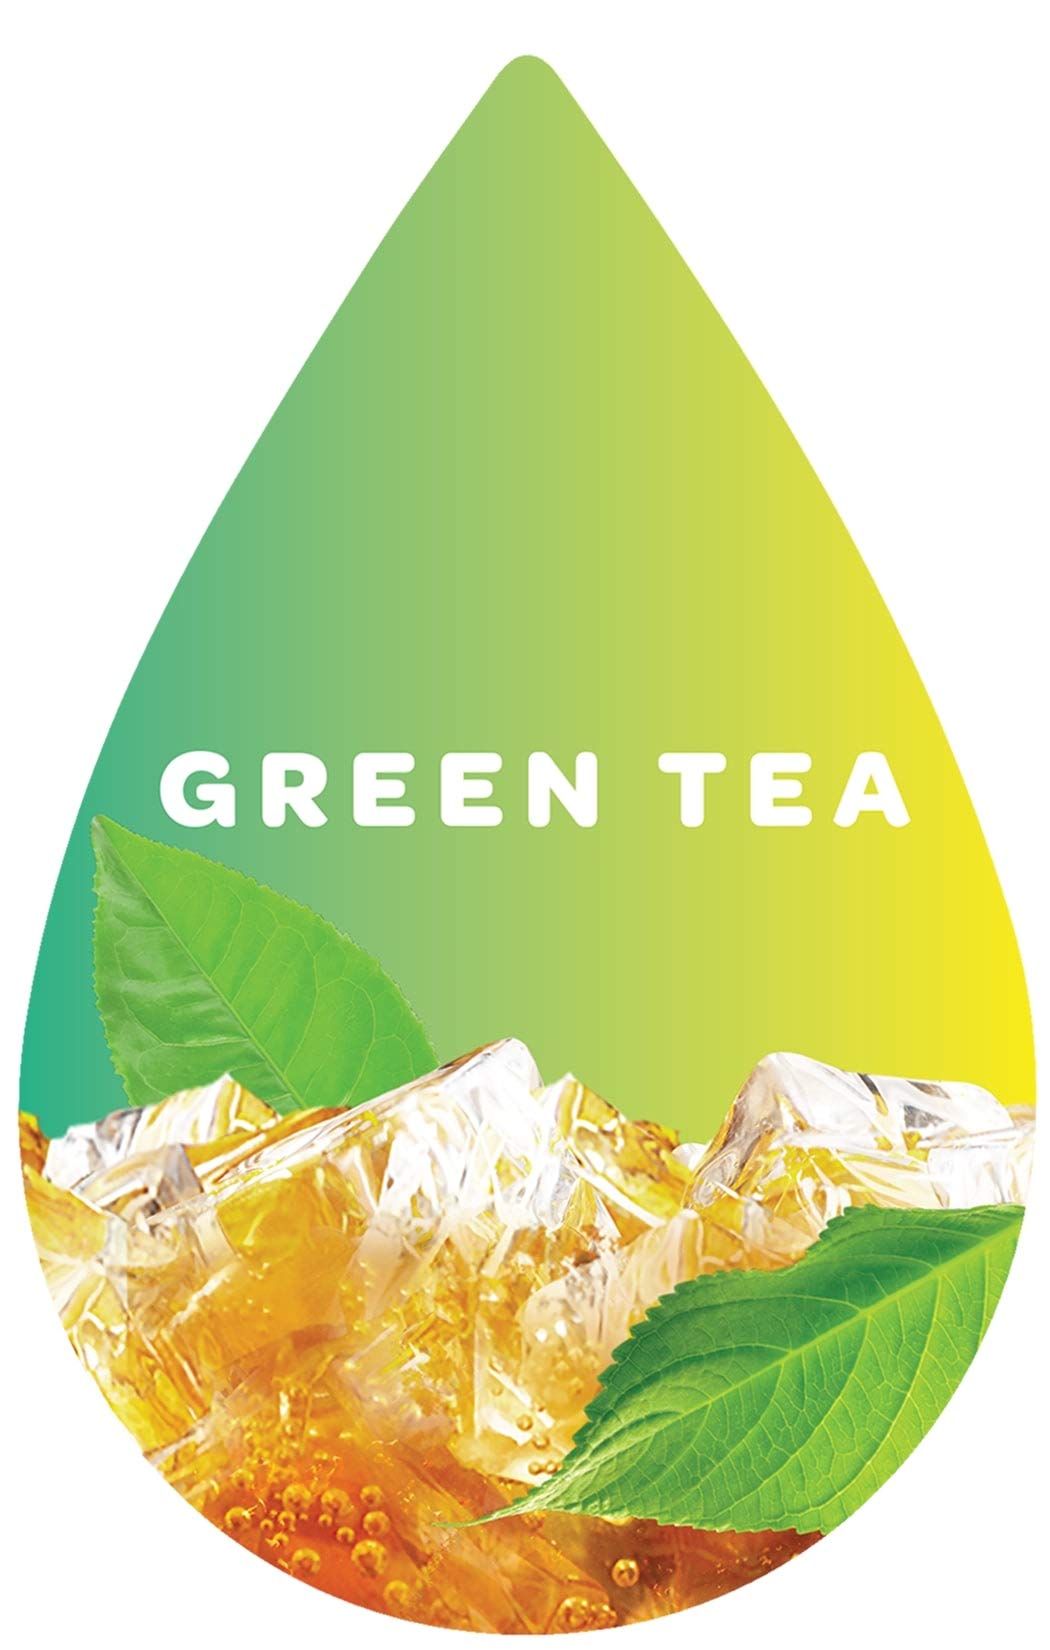 Teazzers Premium All-Natural Green Tea Bags, Large 1-Gallon Iced Tea Brew, Commercial Size Tea Filters, Bulk 96 Pack, 1 oz. Great for Foodservice Ice Tea Brewers, Unsweetened